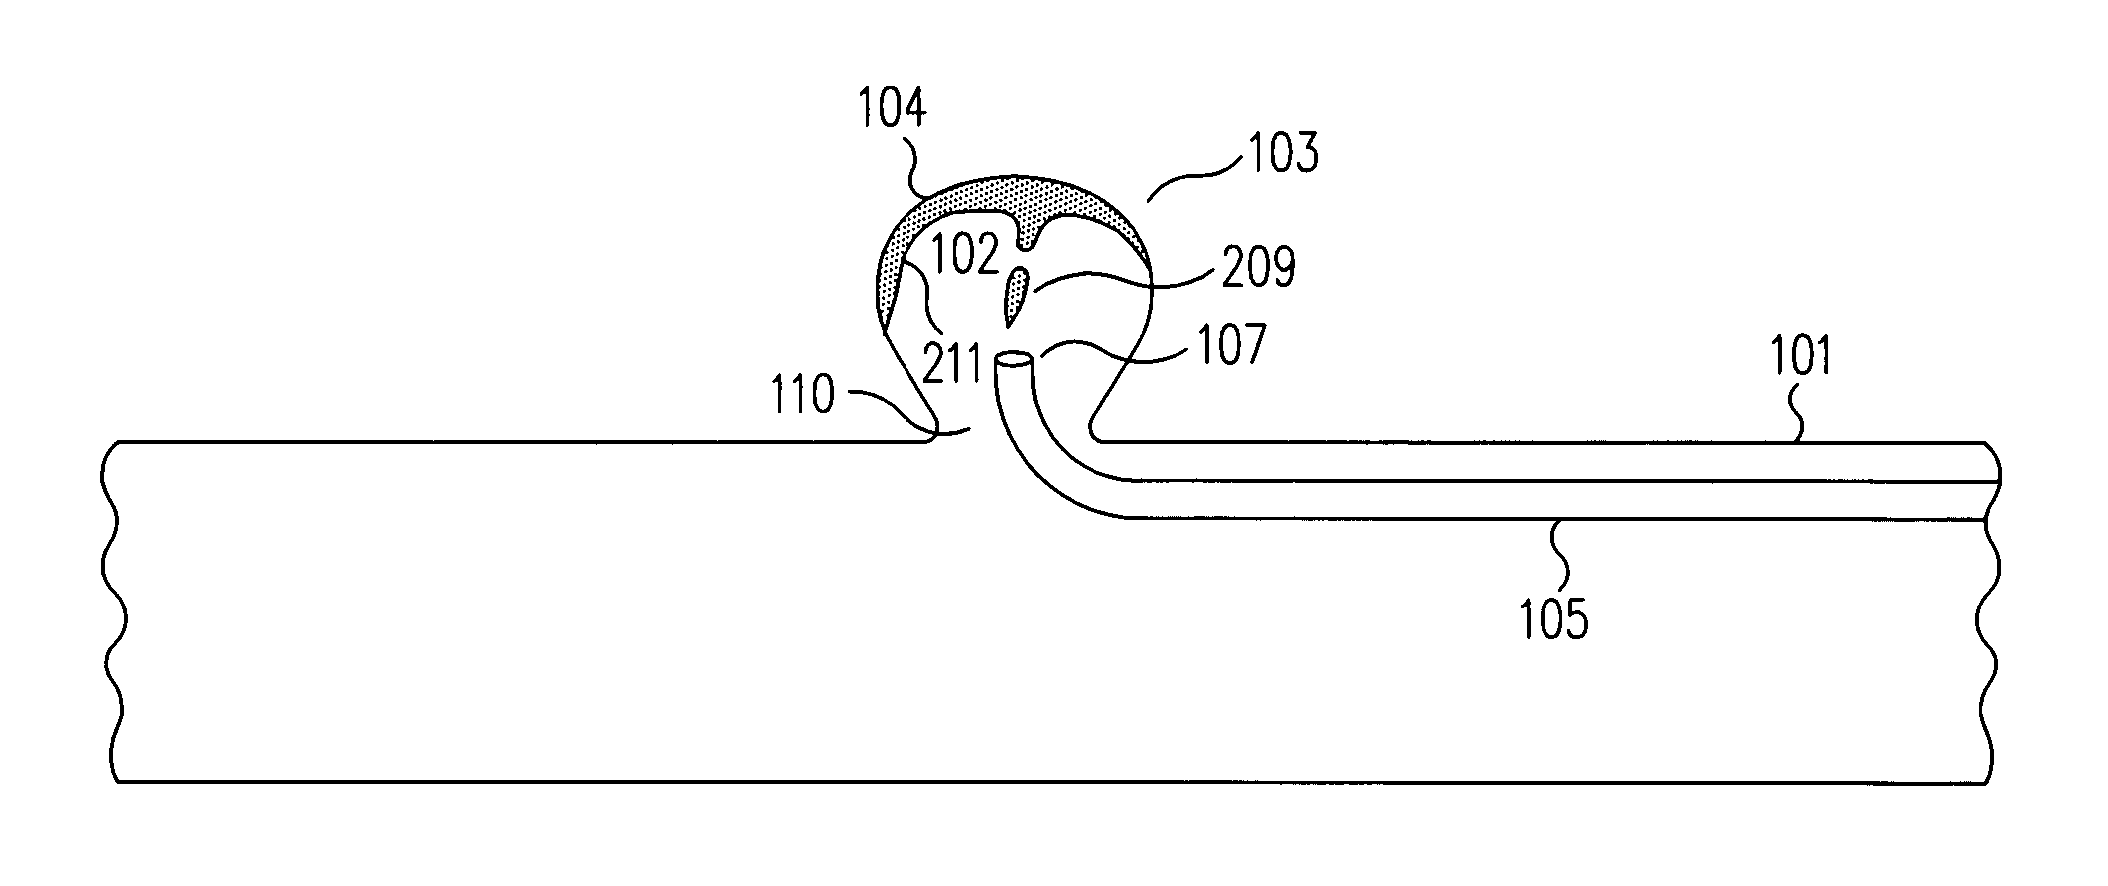 Method and apparatus for aneurismal treatment